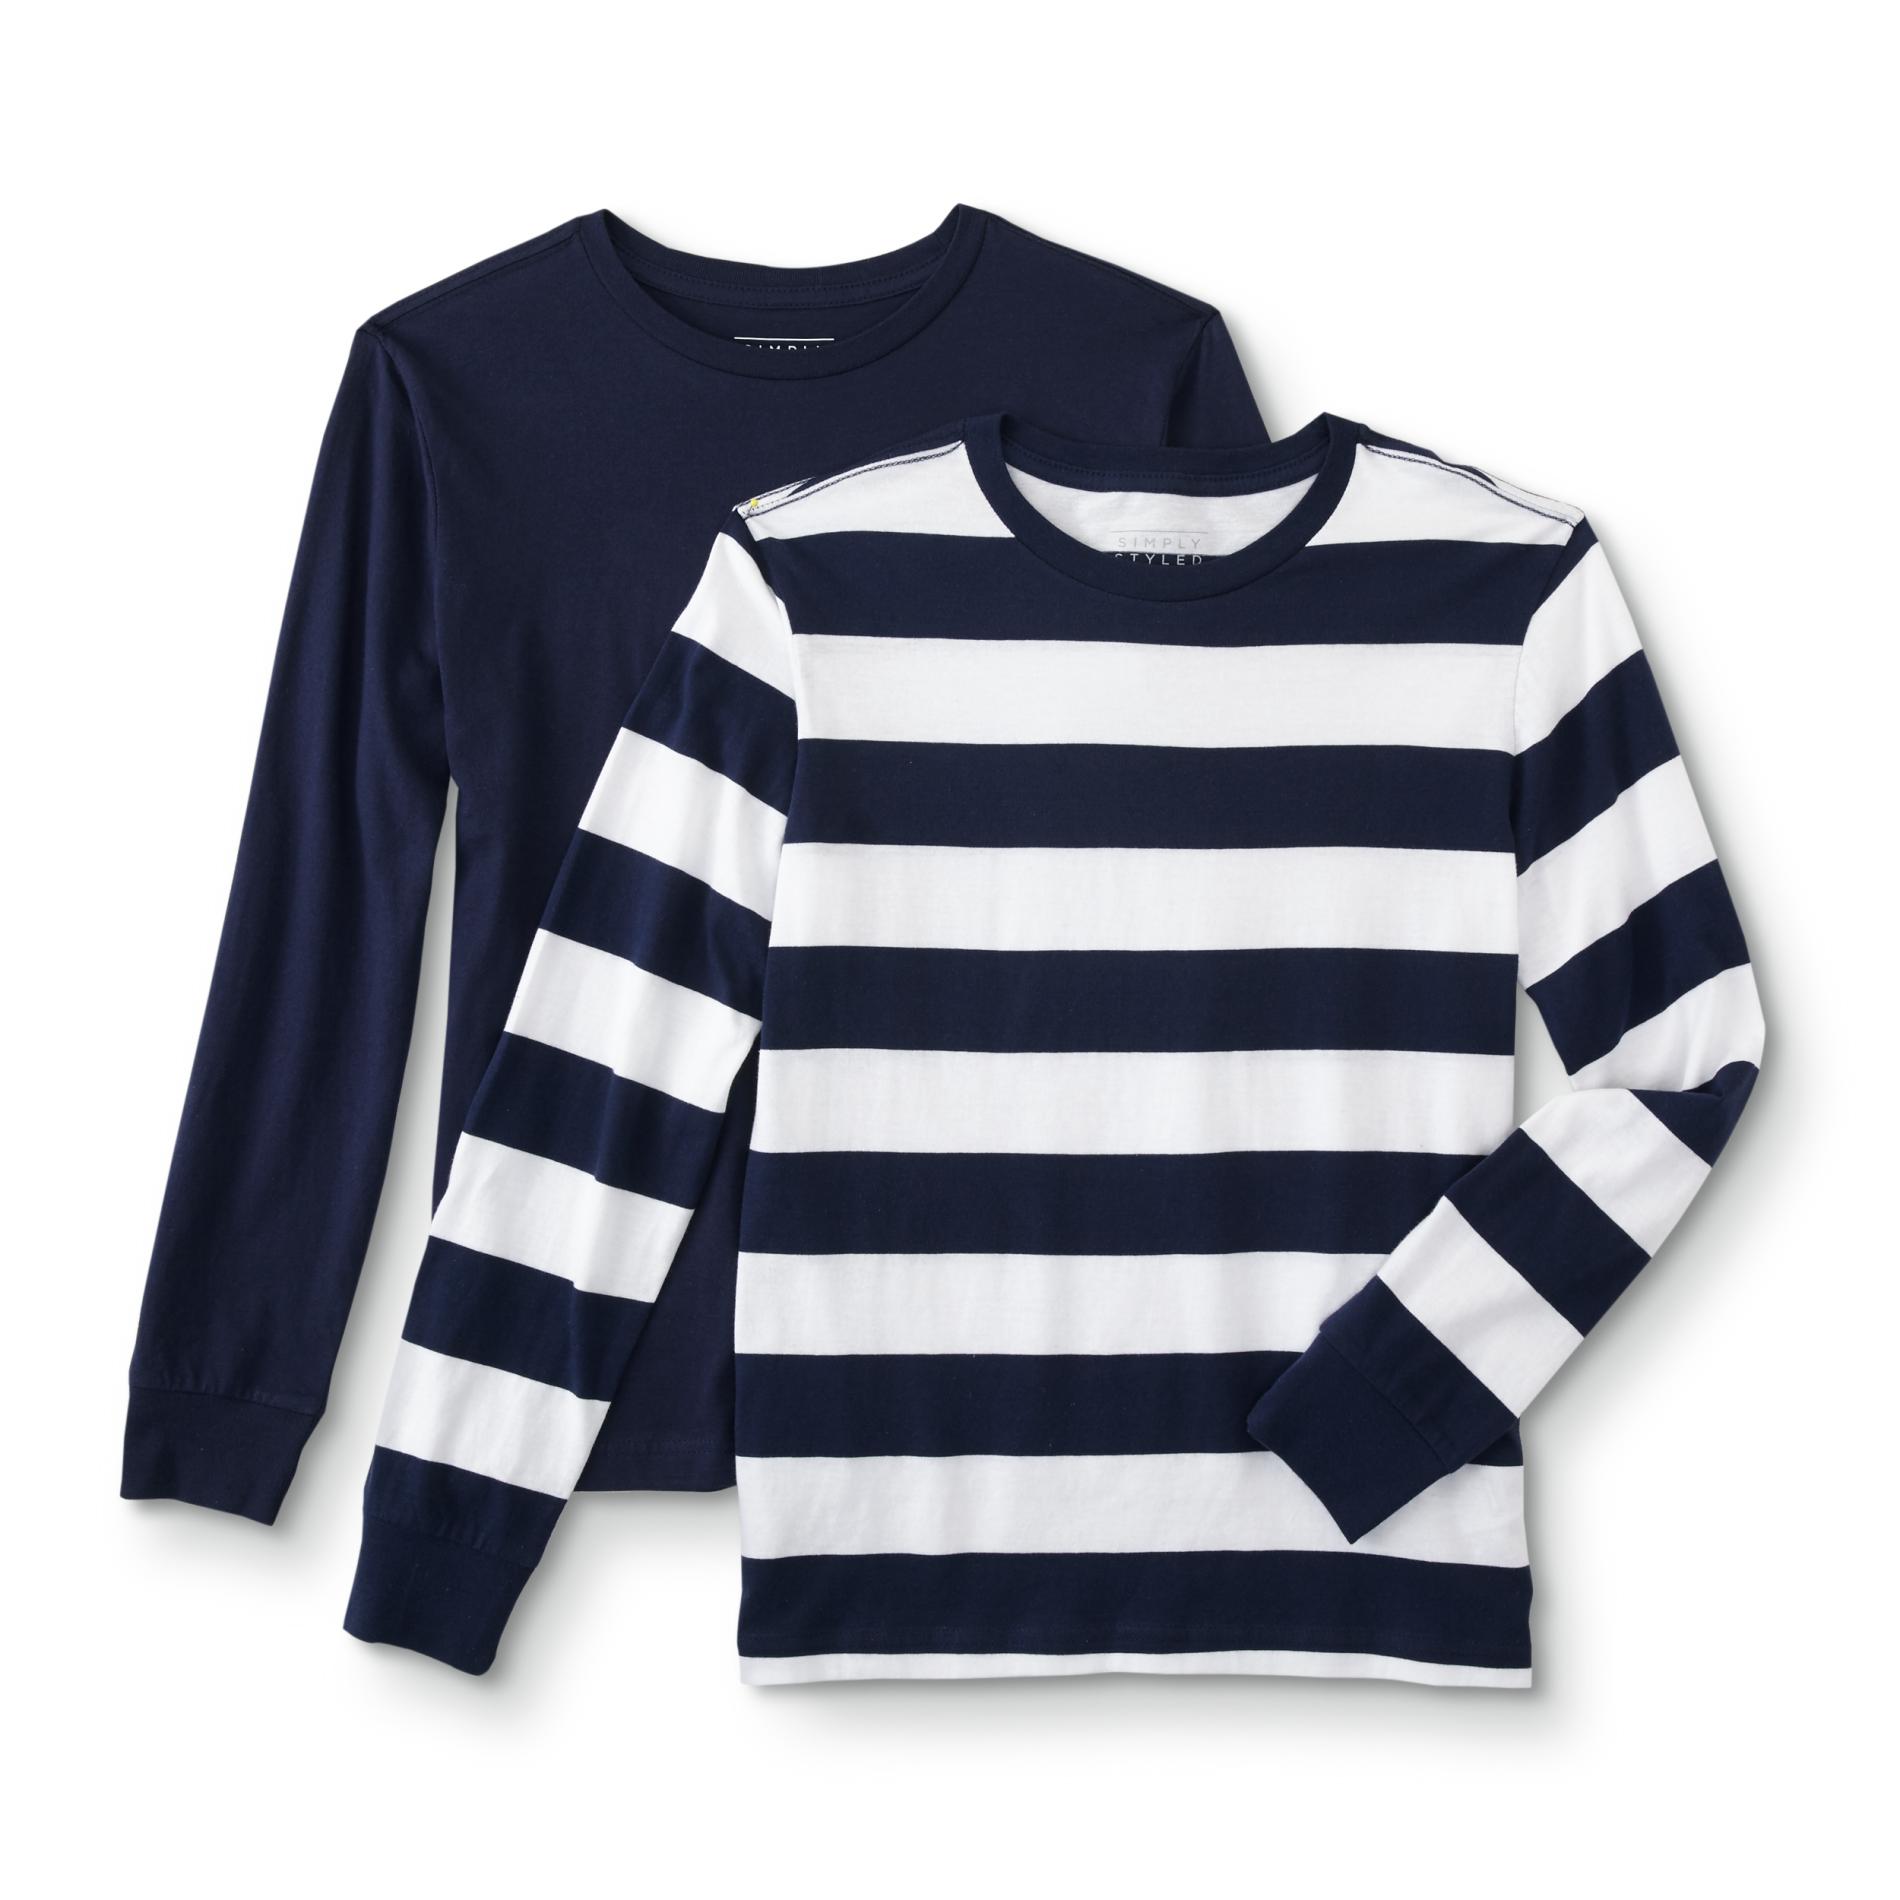 Simply Styled Boys' 2-Pack Long-Sleeve T-Shirts - Striped